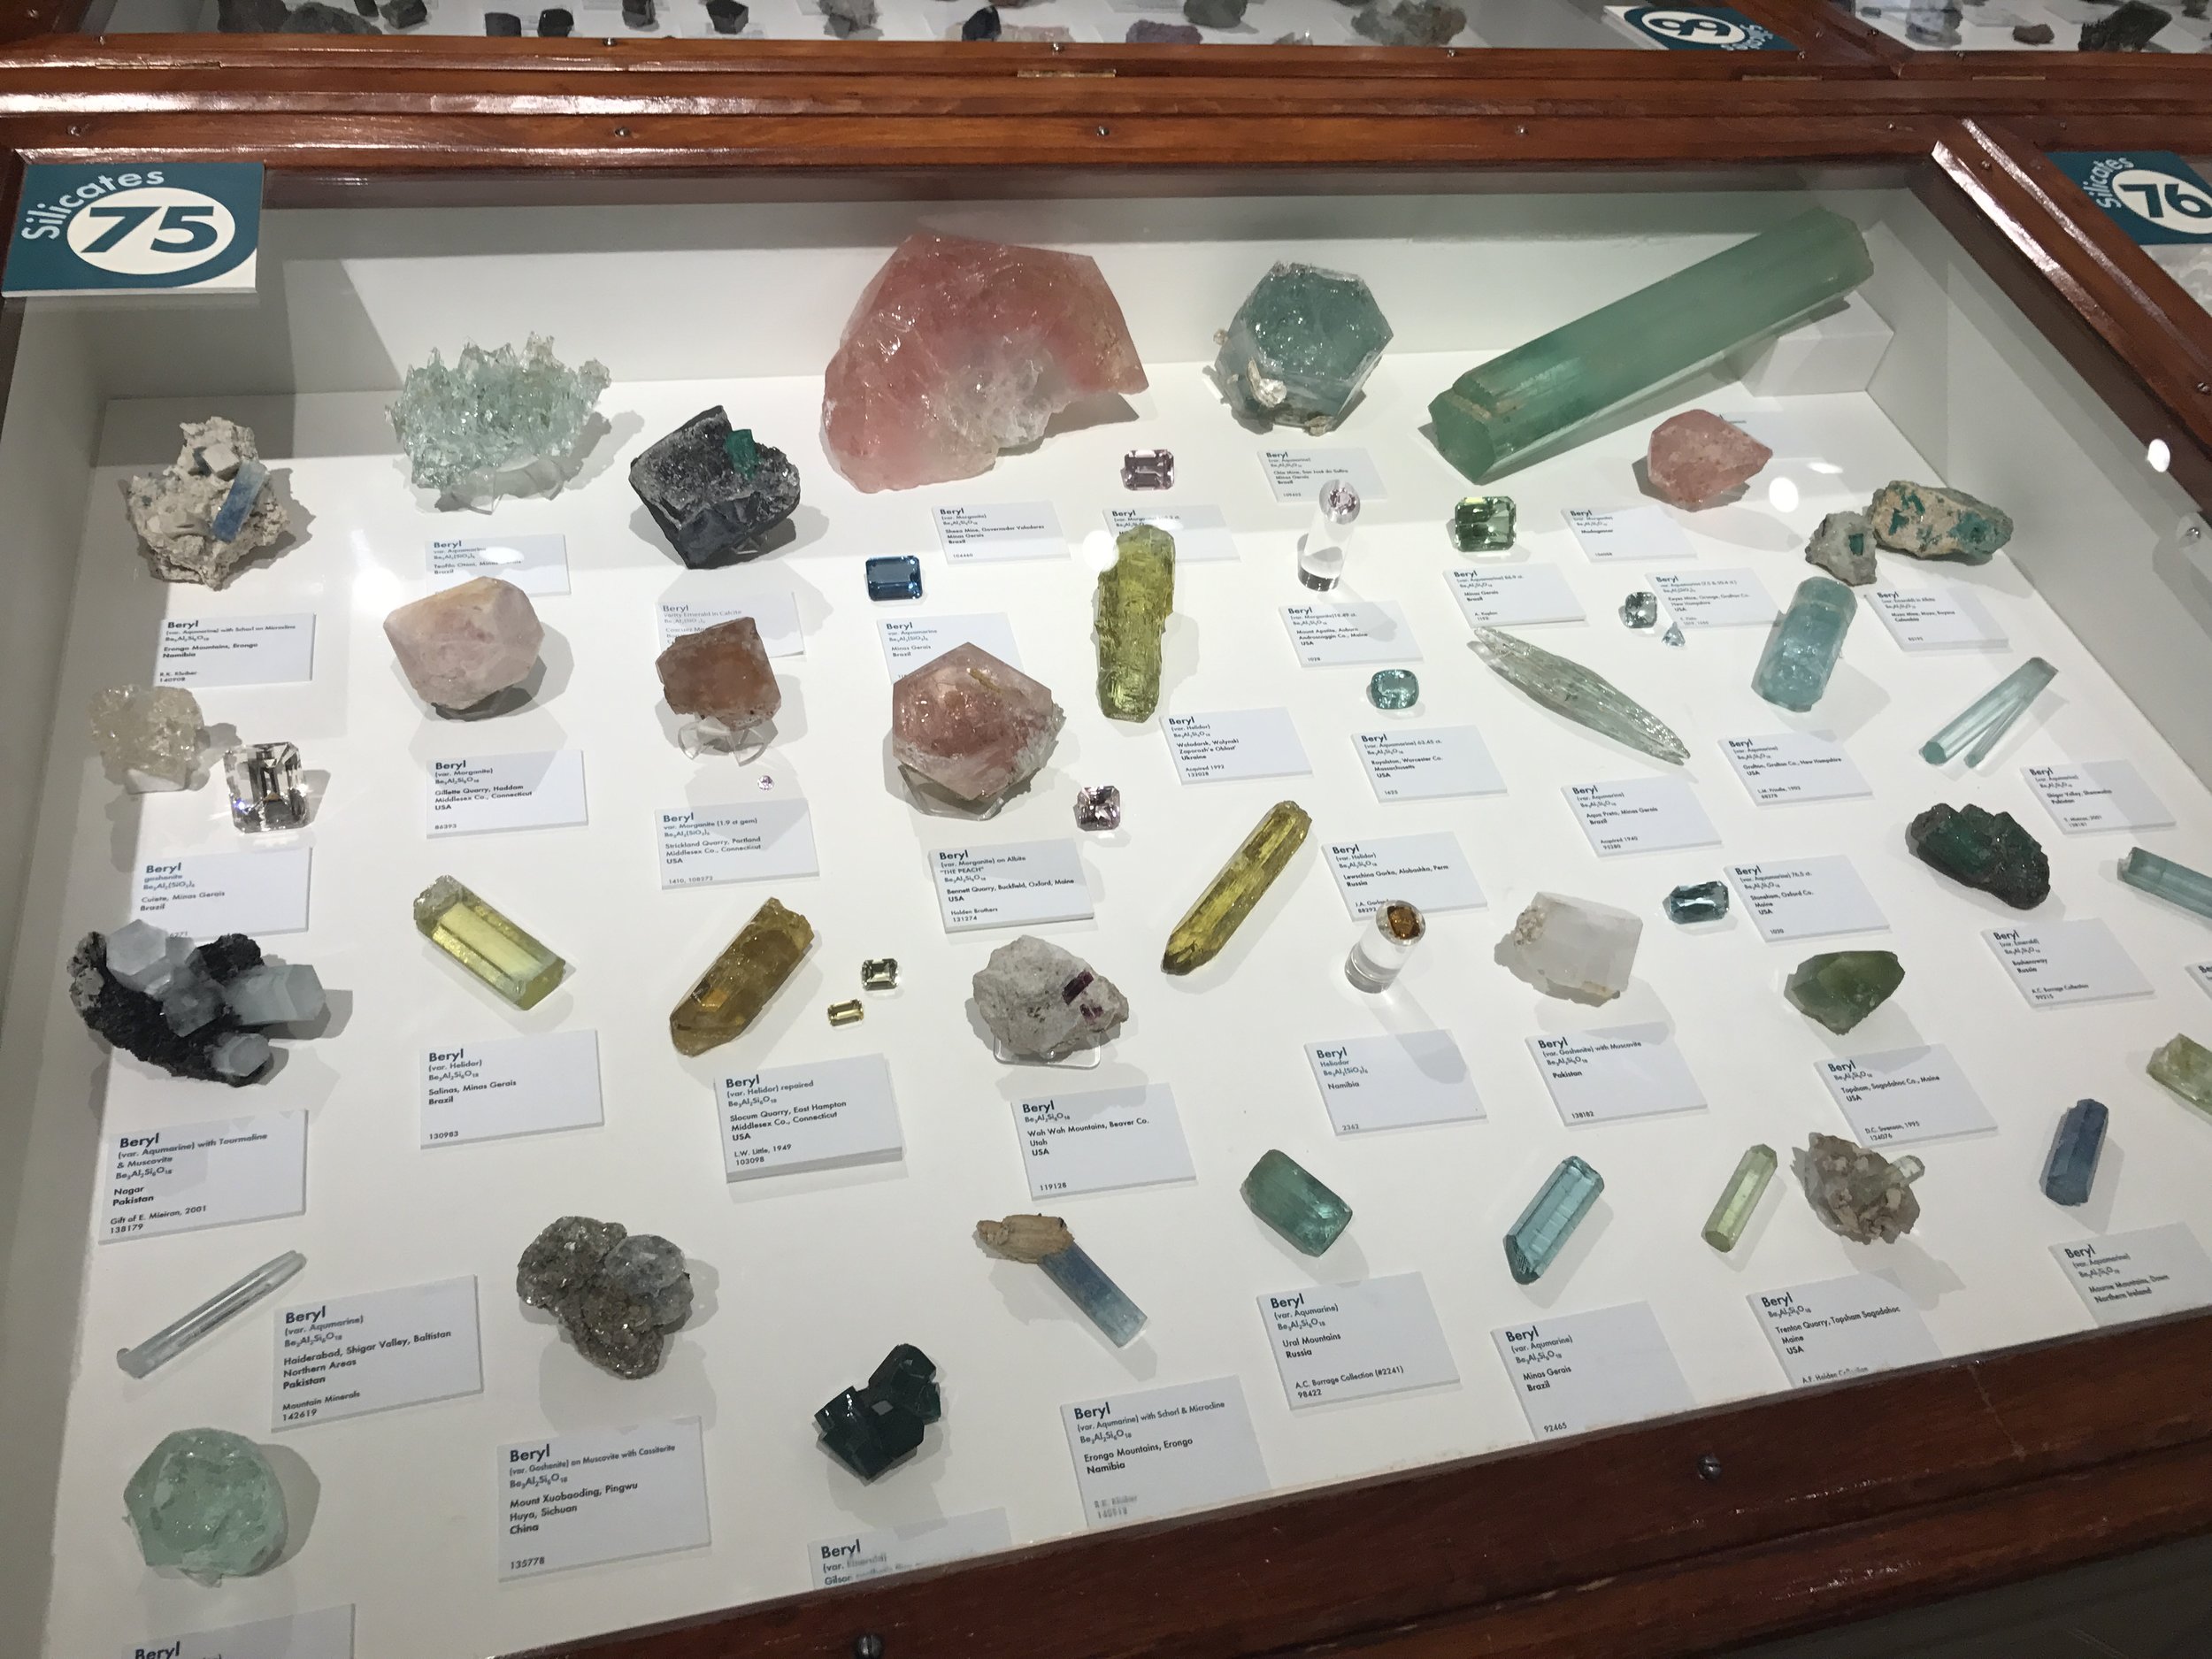 Many more minerals